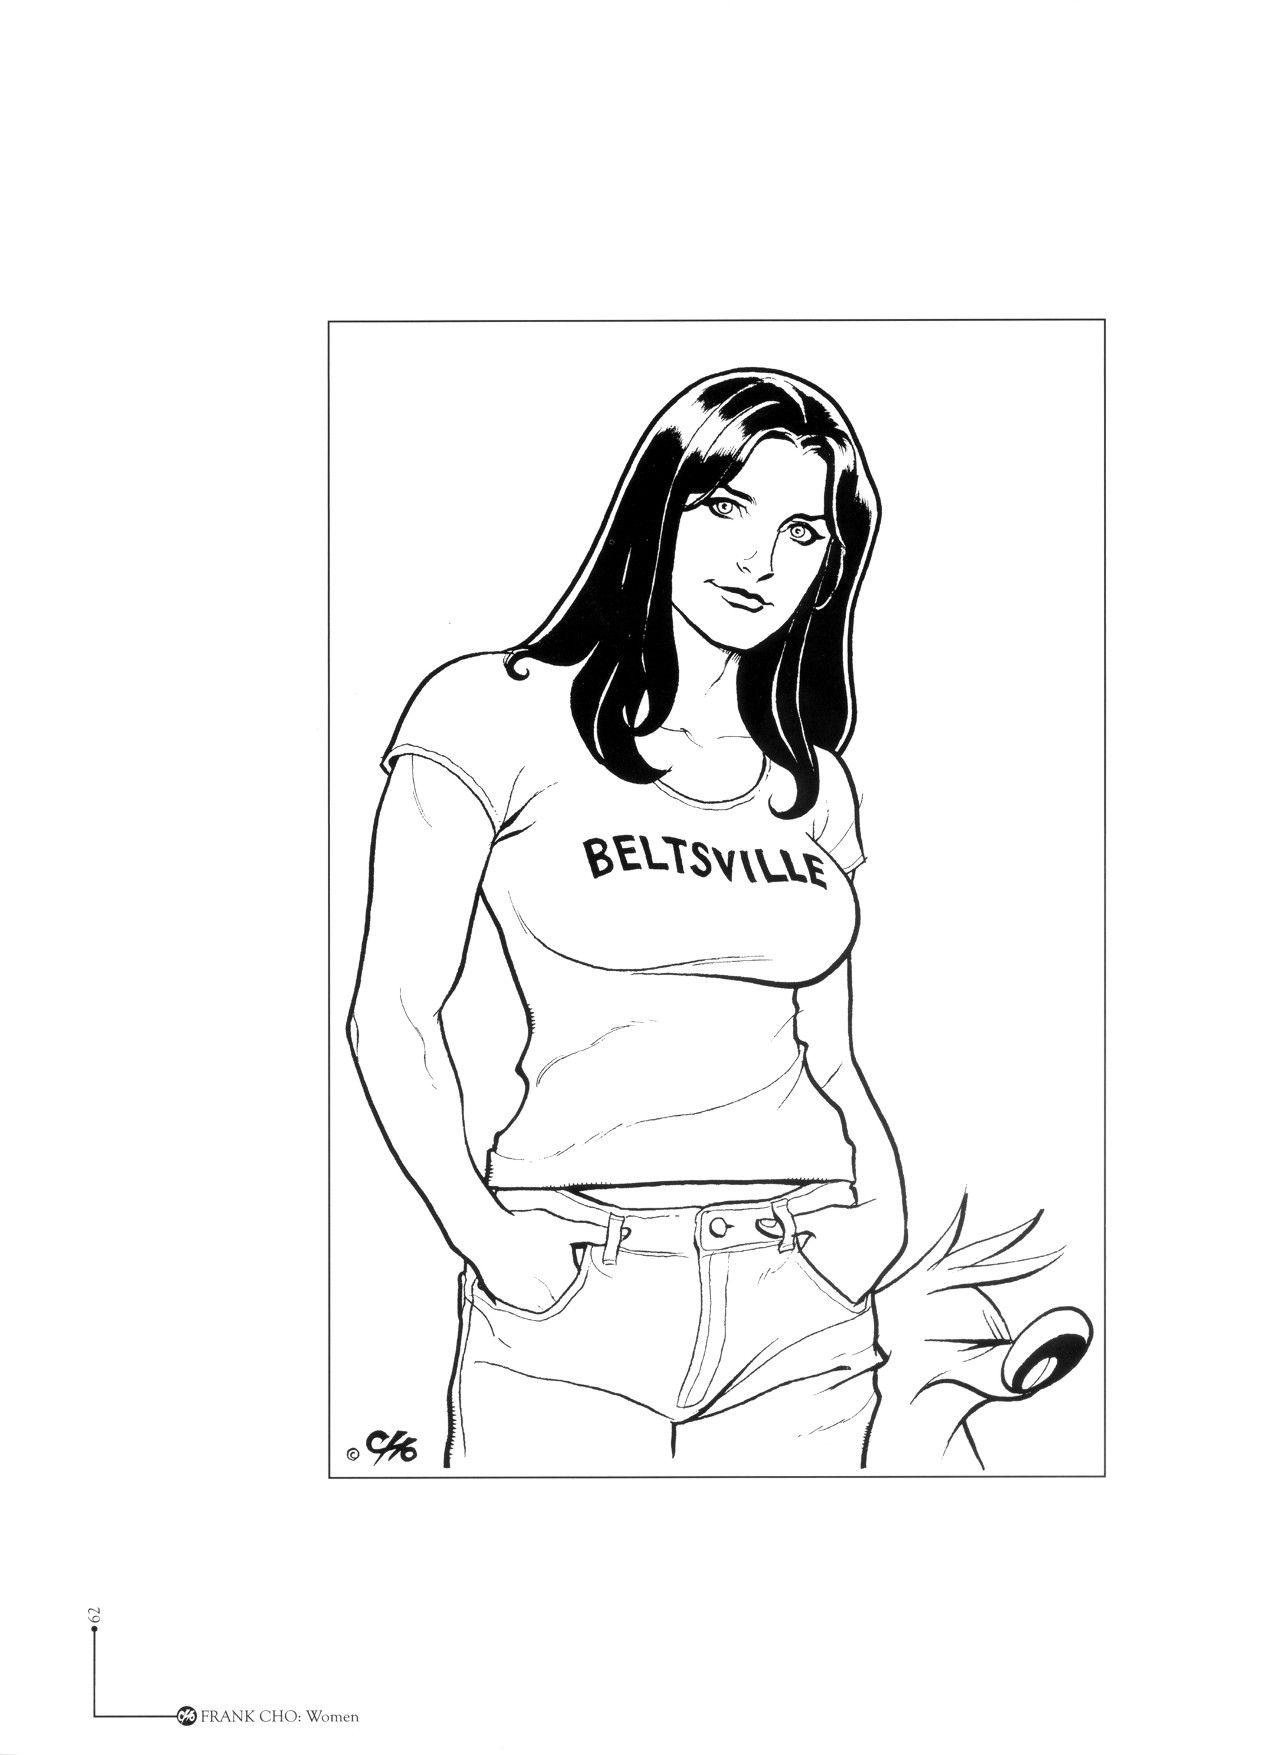 [Frank Cho] Women - Selected Drawings and Illustrations 63